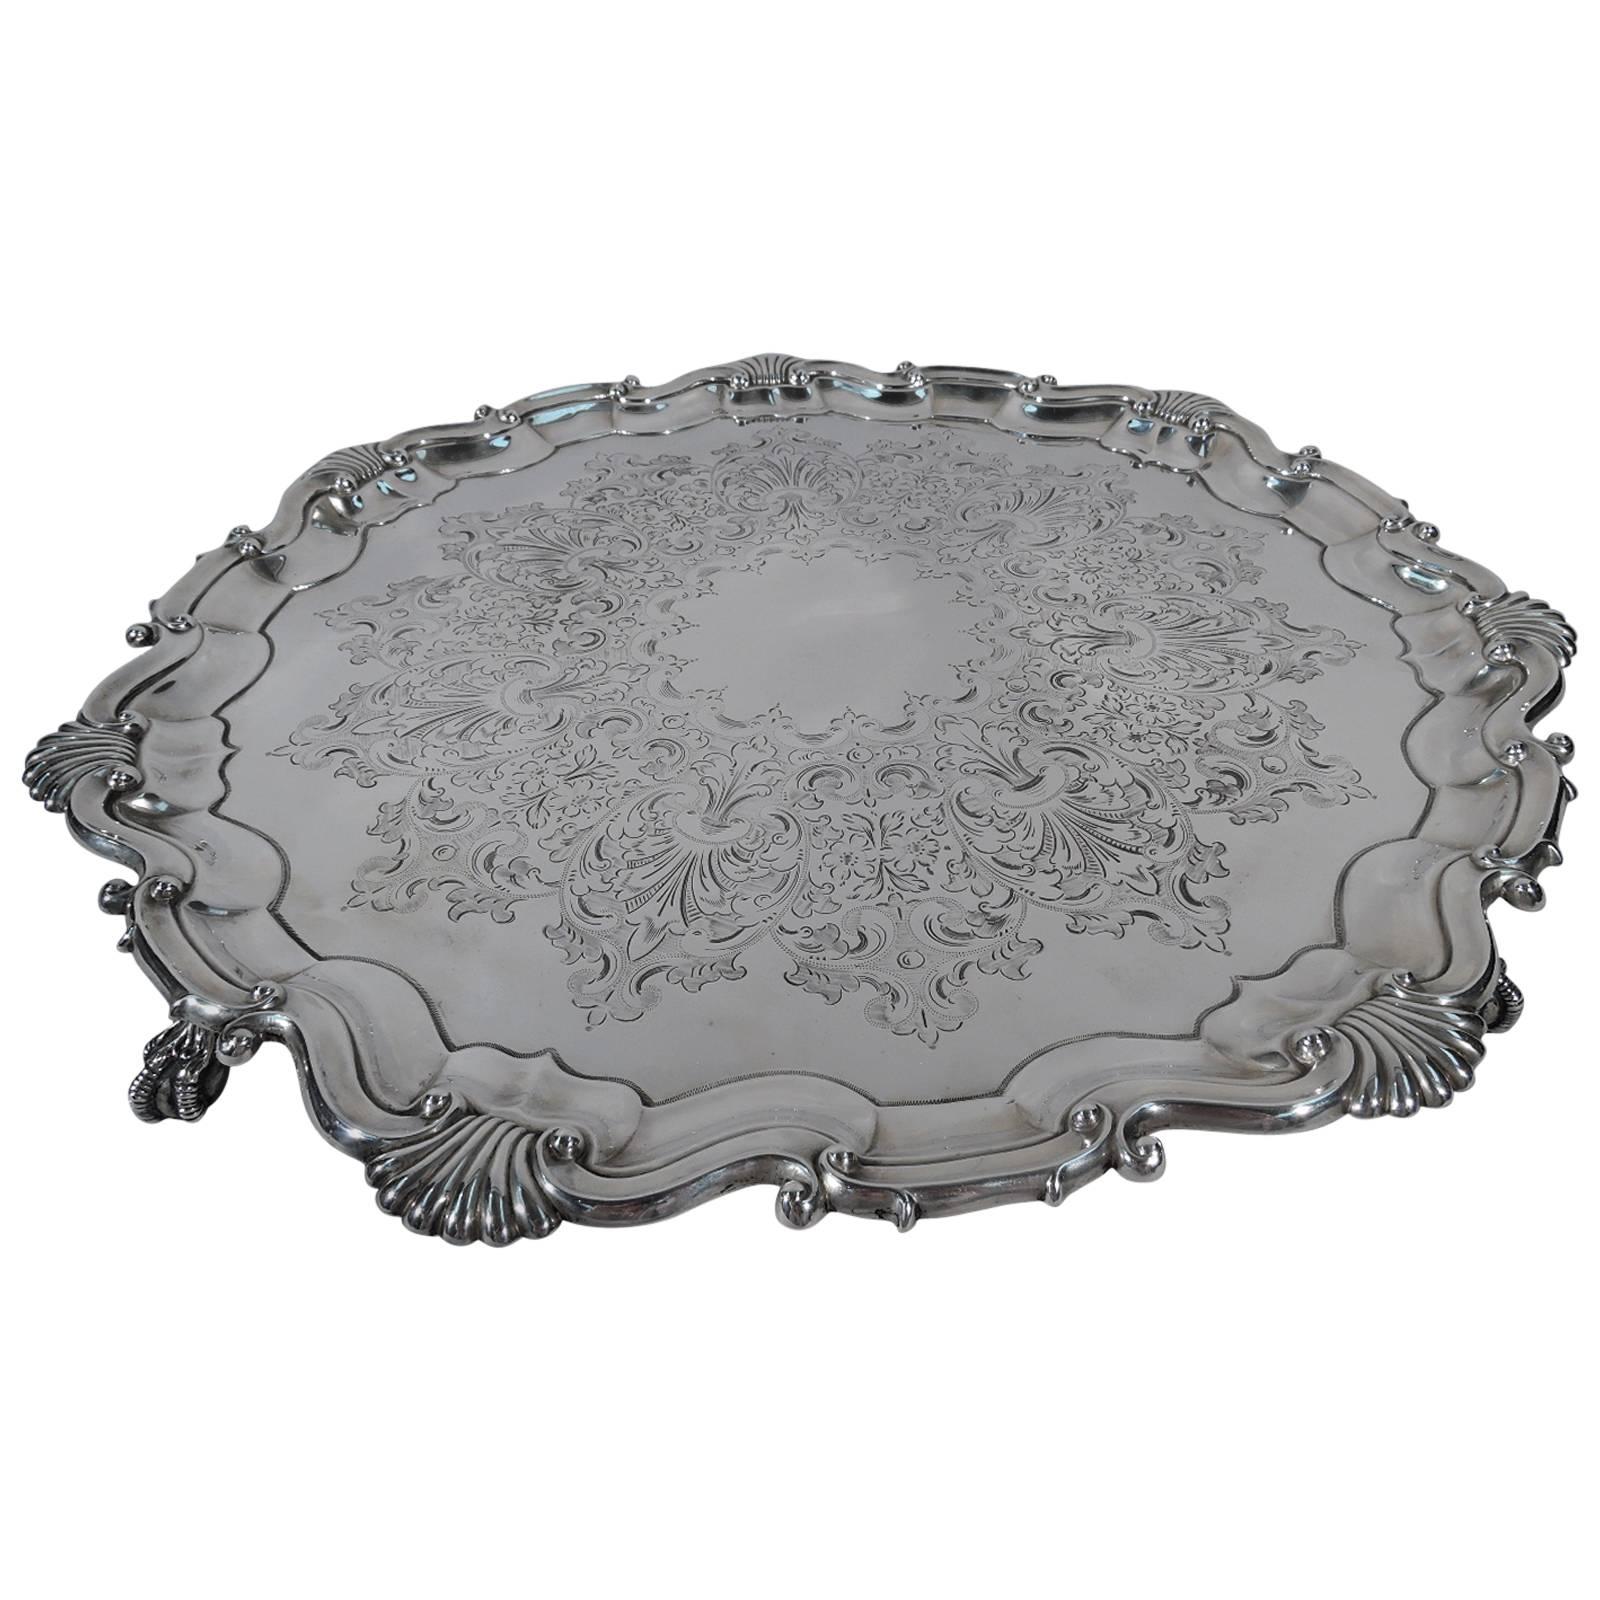 English Edwardian Georgian Large and Heavy Sterling Silver Salver Tray